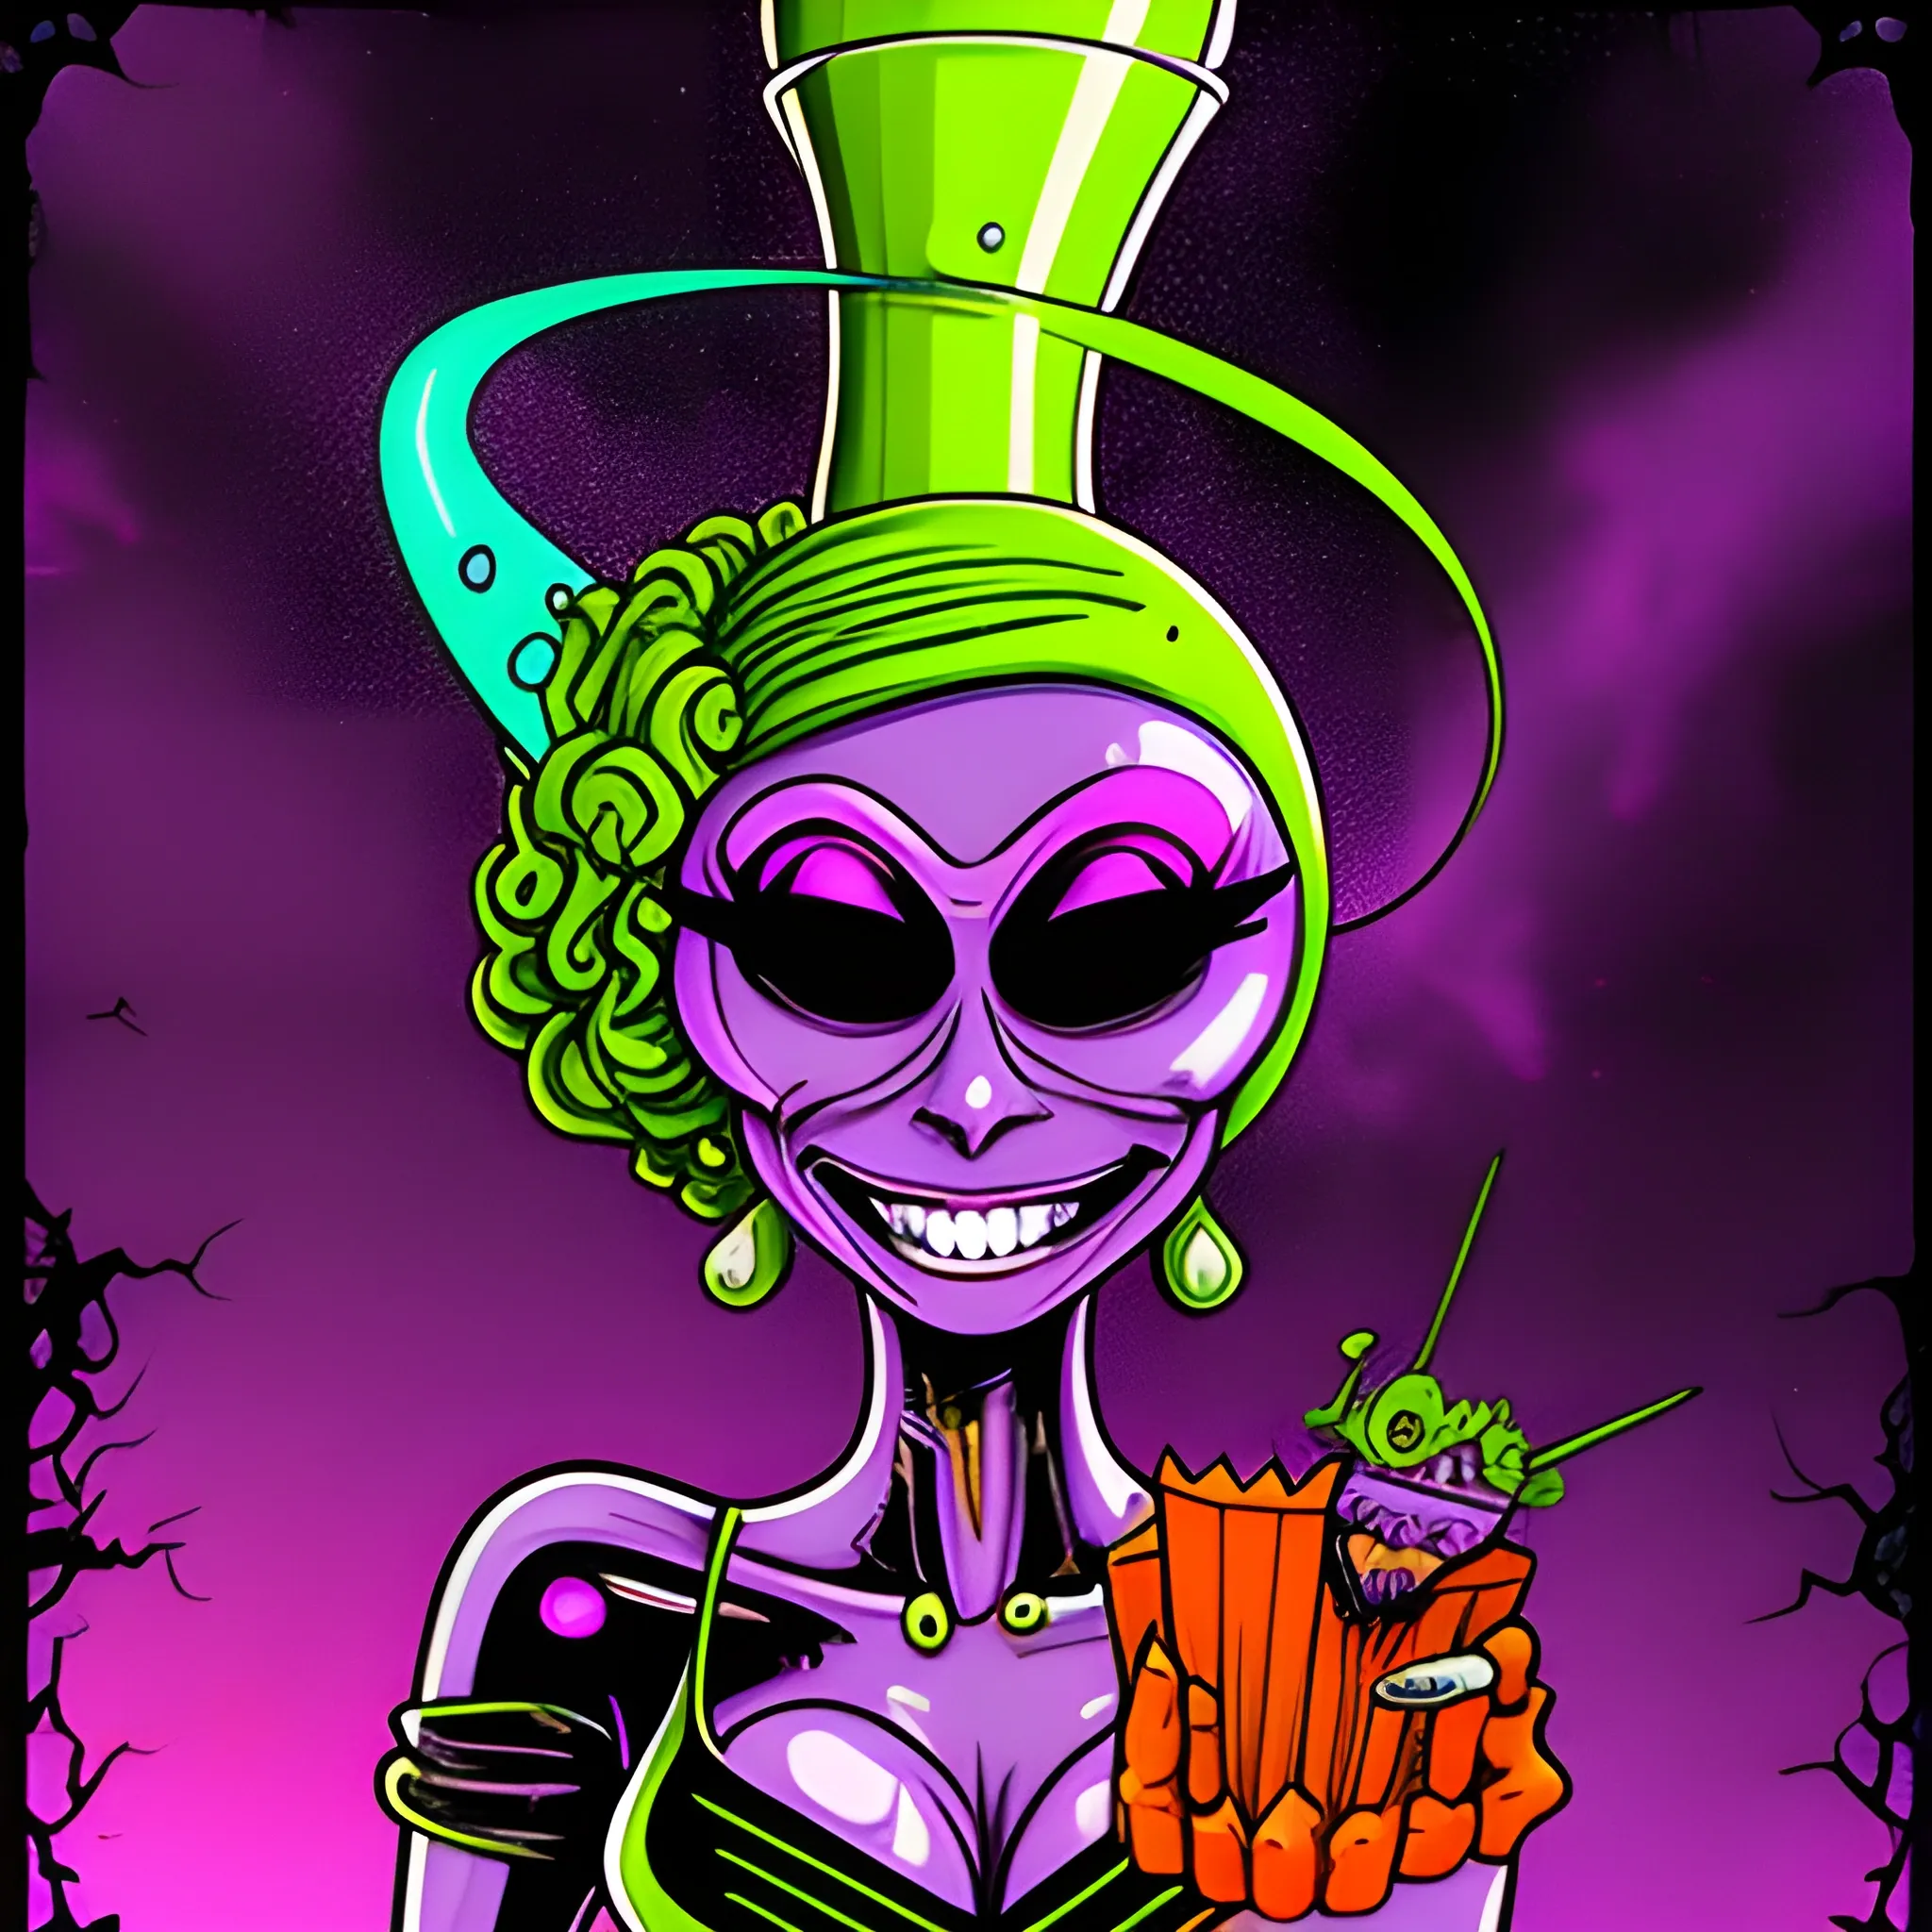 dayglo orange, neon grape purple, chartreuse green, Halloween, amethyst smoking skater girl, combine the styles of Munk One and Alex Pardee, trending on deviantart, lowbrow, heavy metal tshirt design, big smile picture, on a black background, luminous color sparkles, nebula sky